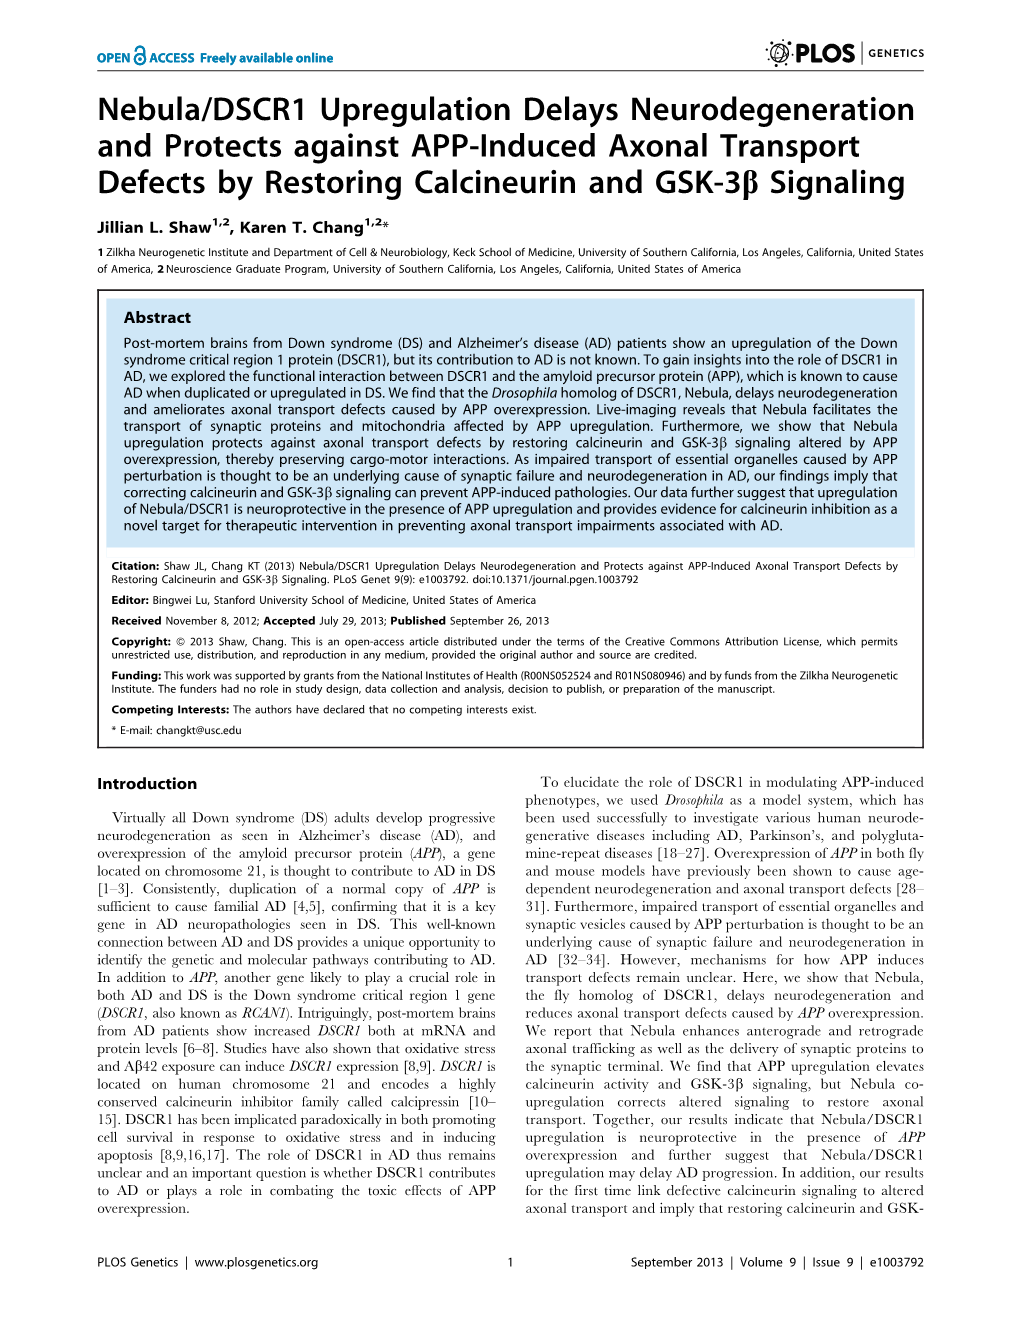 Nebula/DSCR1 Upregulation Delays Neurodegeneration and Protects Against APP-Induced Axonal Transport Defects by Restoring Calcineurin and GSK-3B Signaling